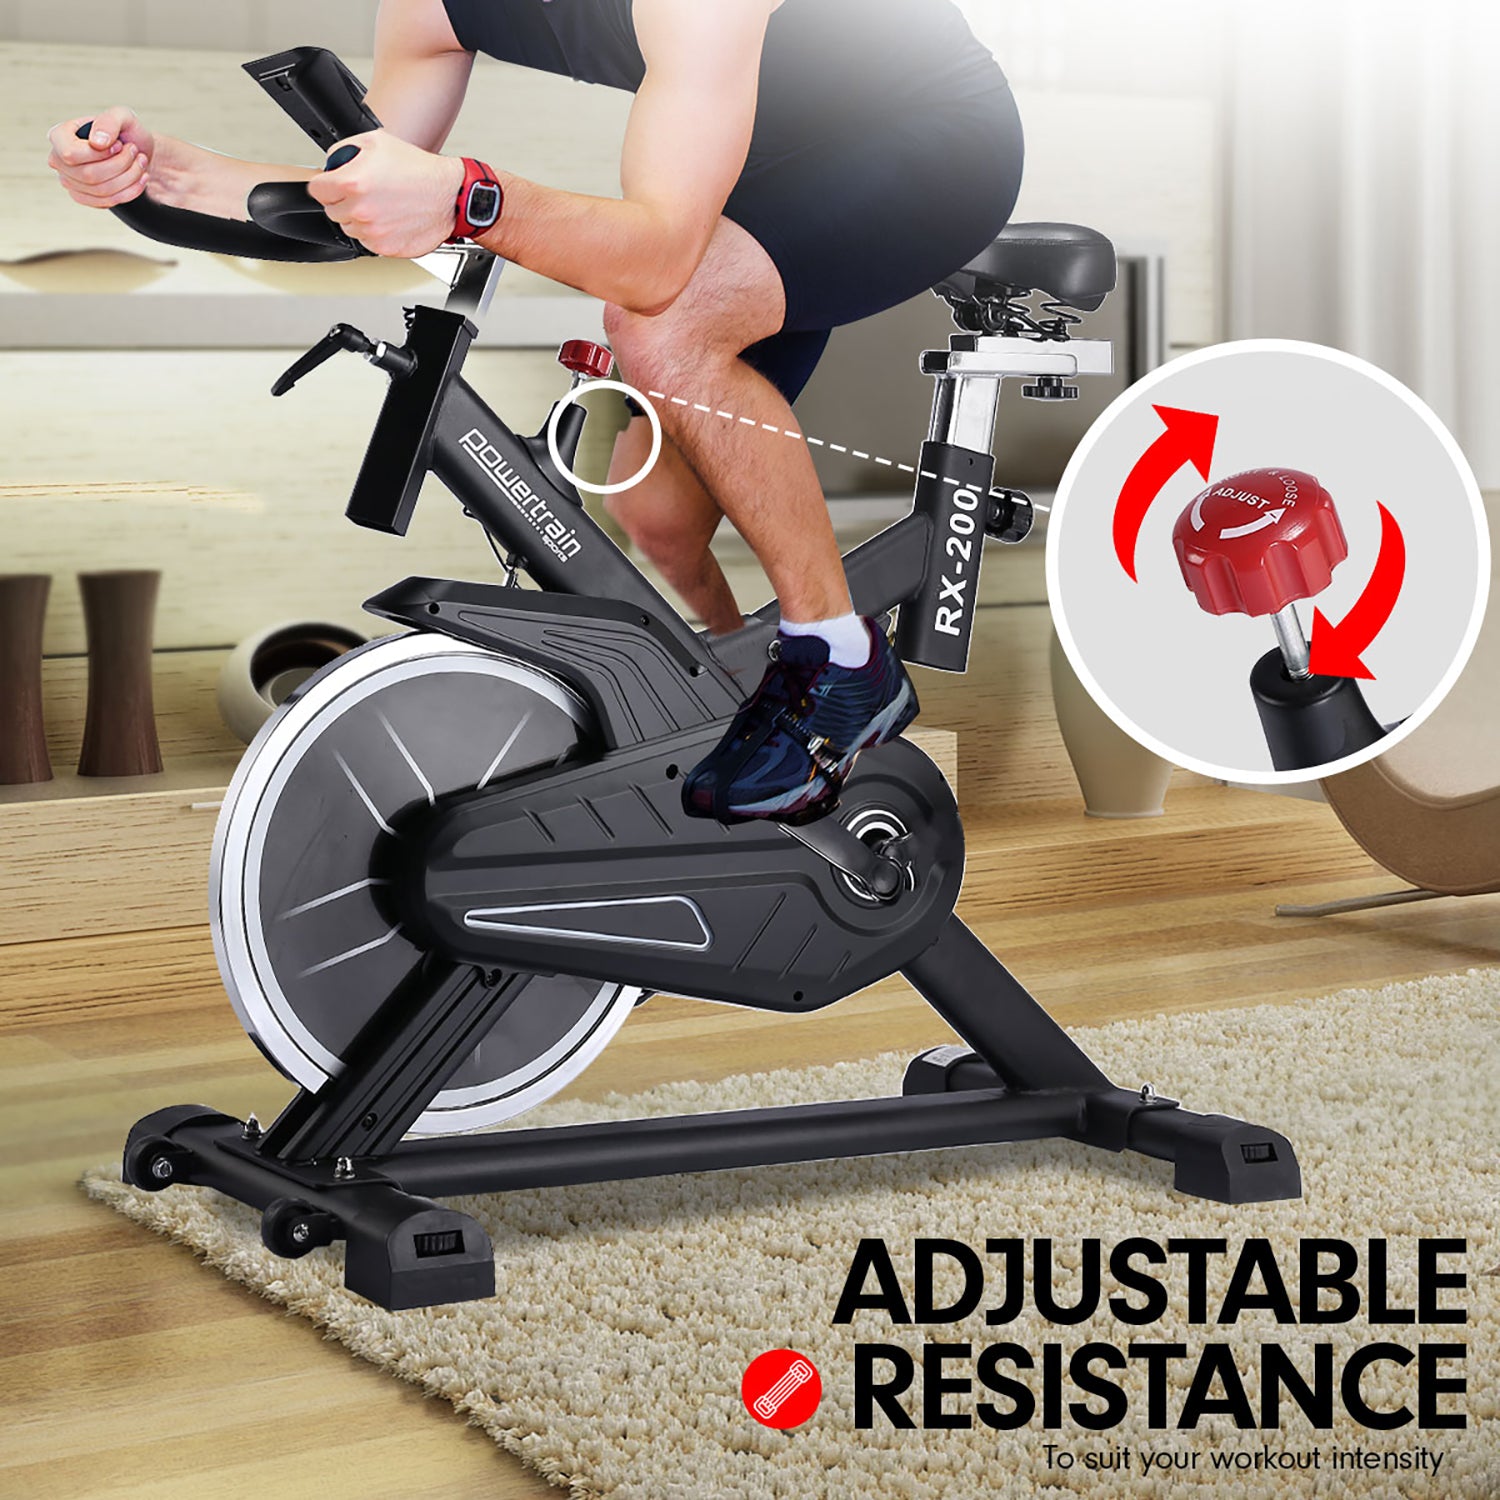 Powertrain RX-200 Exercise Spin Bike Cardio Cycling - Black - SILBERSHELL